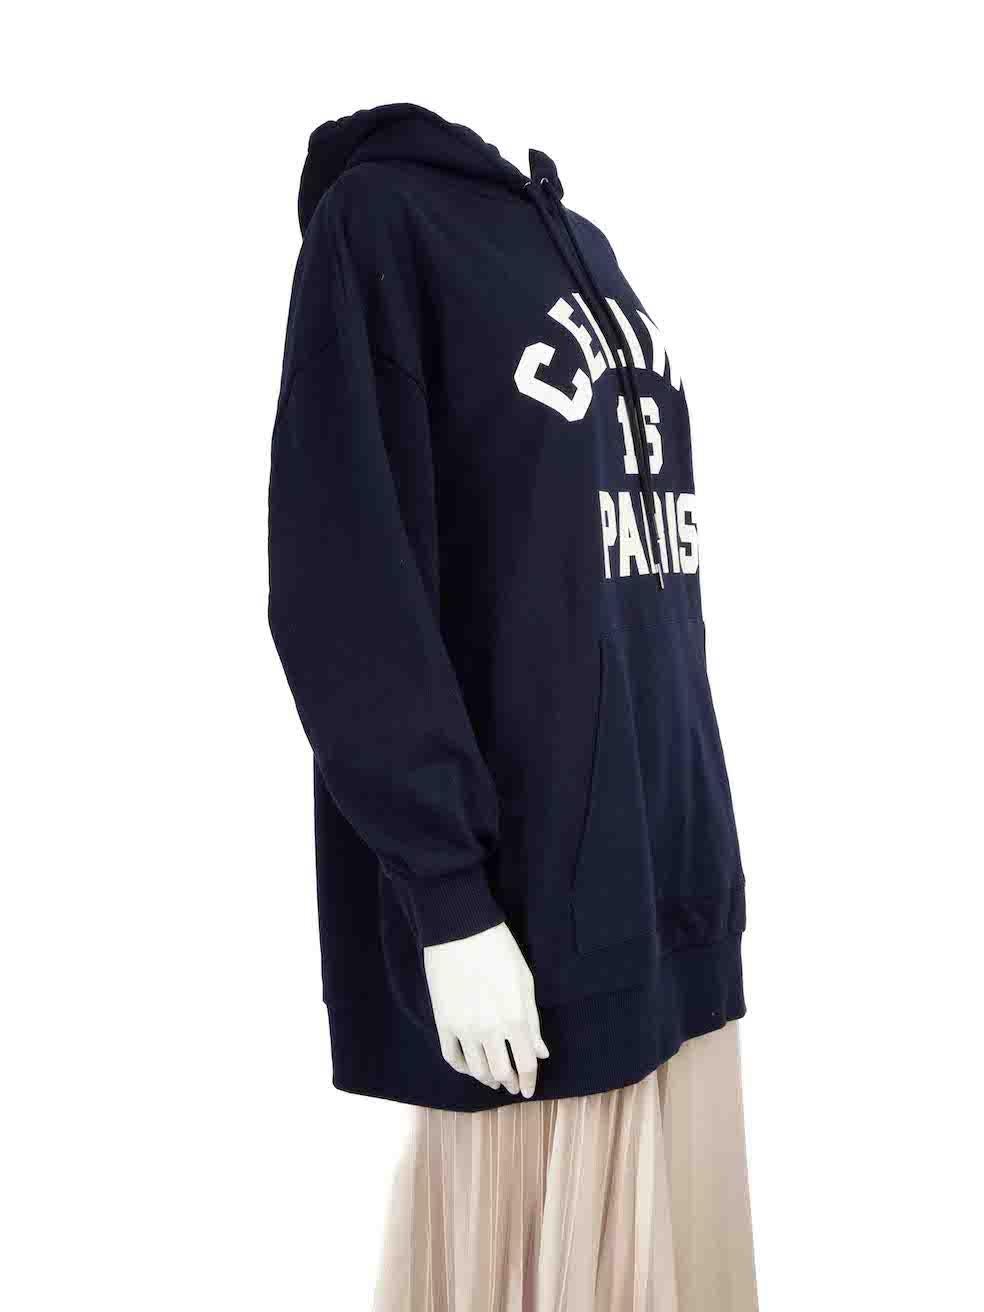 CONDITION is Very good. Hardly any visible wear to hoodie is evident. A very light mark on the right side elbow on this used Celinè designer resale item.
 
 
 
 Details
 
 
 2022
 
 Navy
 
 Cotton
 
 Hoodie
 
 Oversized fit
 
 Long sleeves
 
 Logo